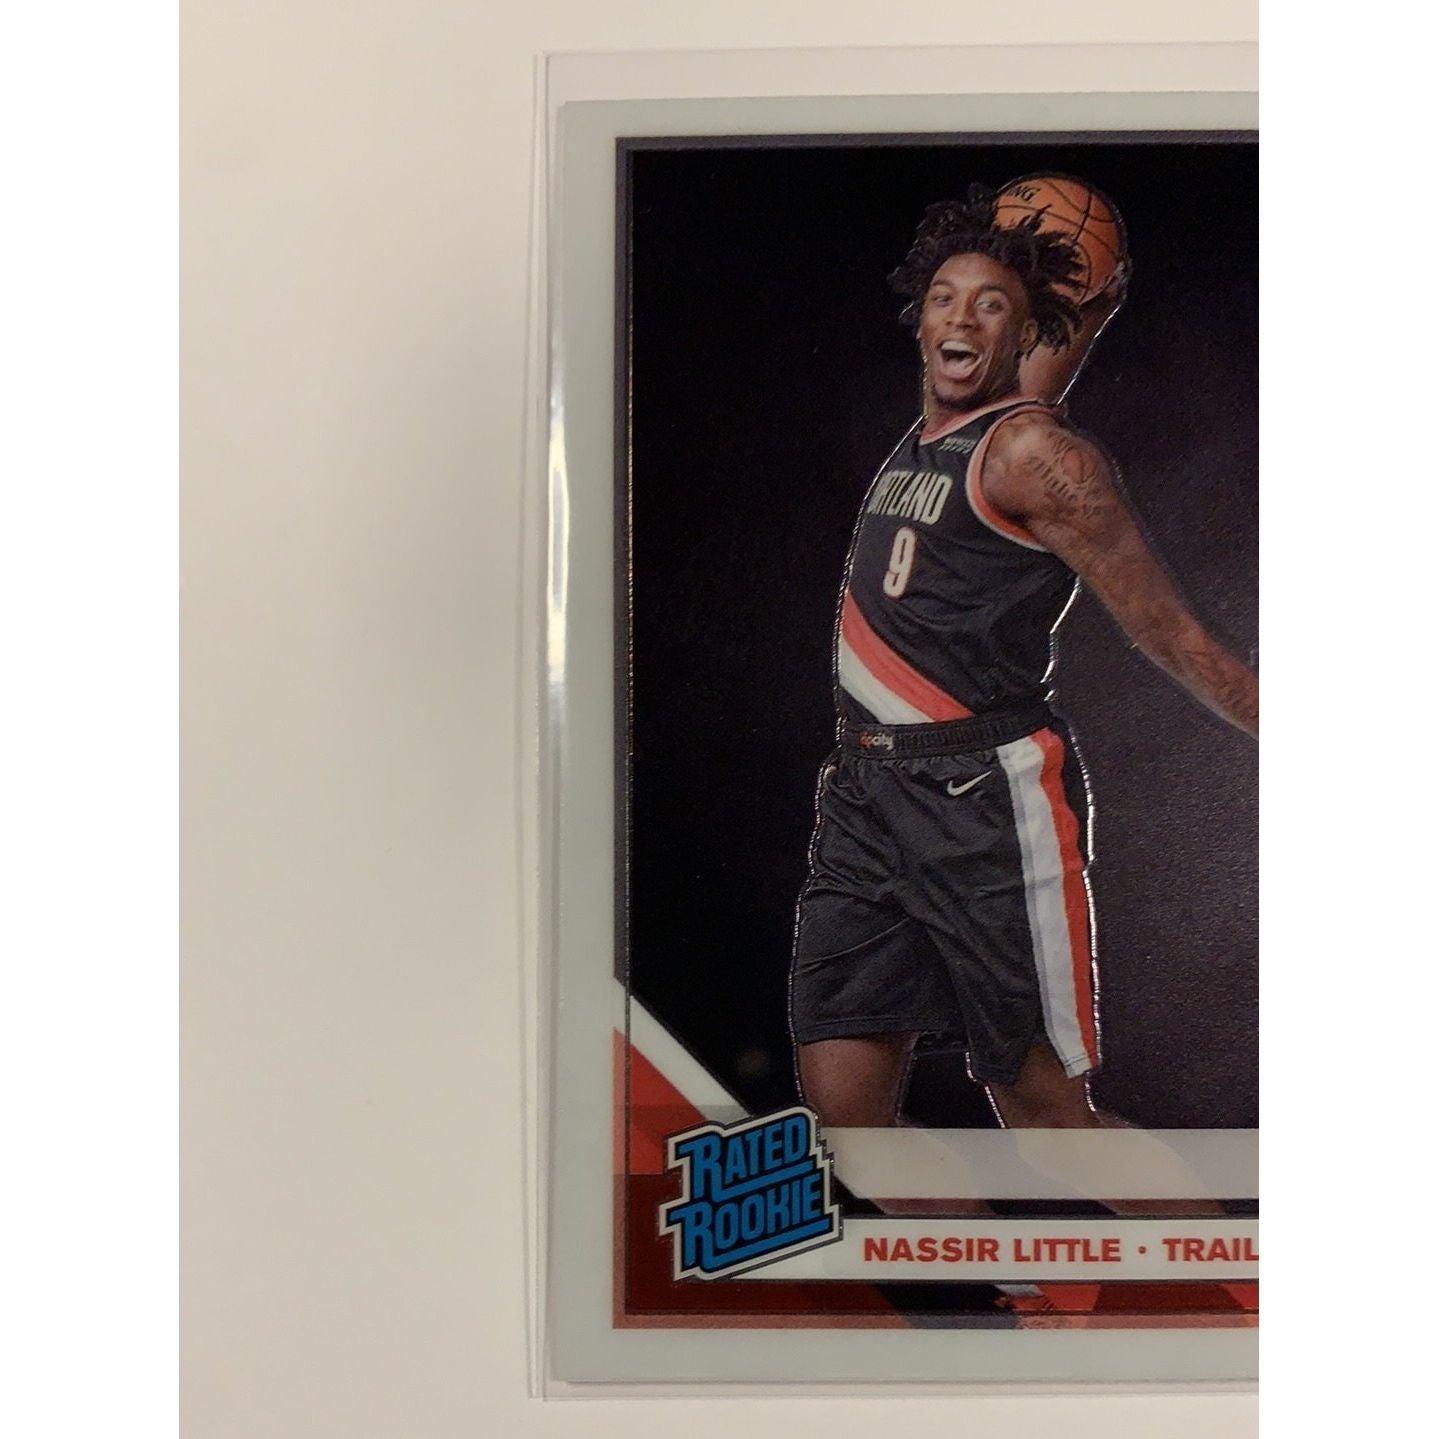  2019-20 Donruss Optic Nassir Little Rated Rookie  Local Legends Cards & Collectibles